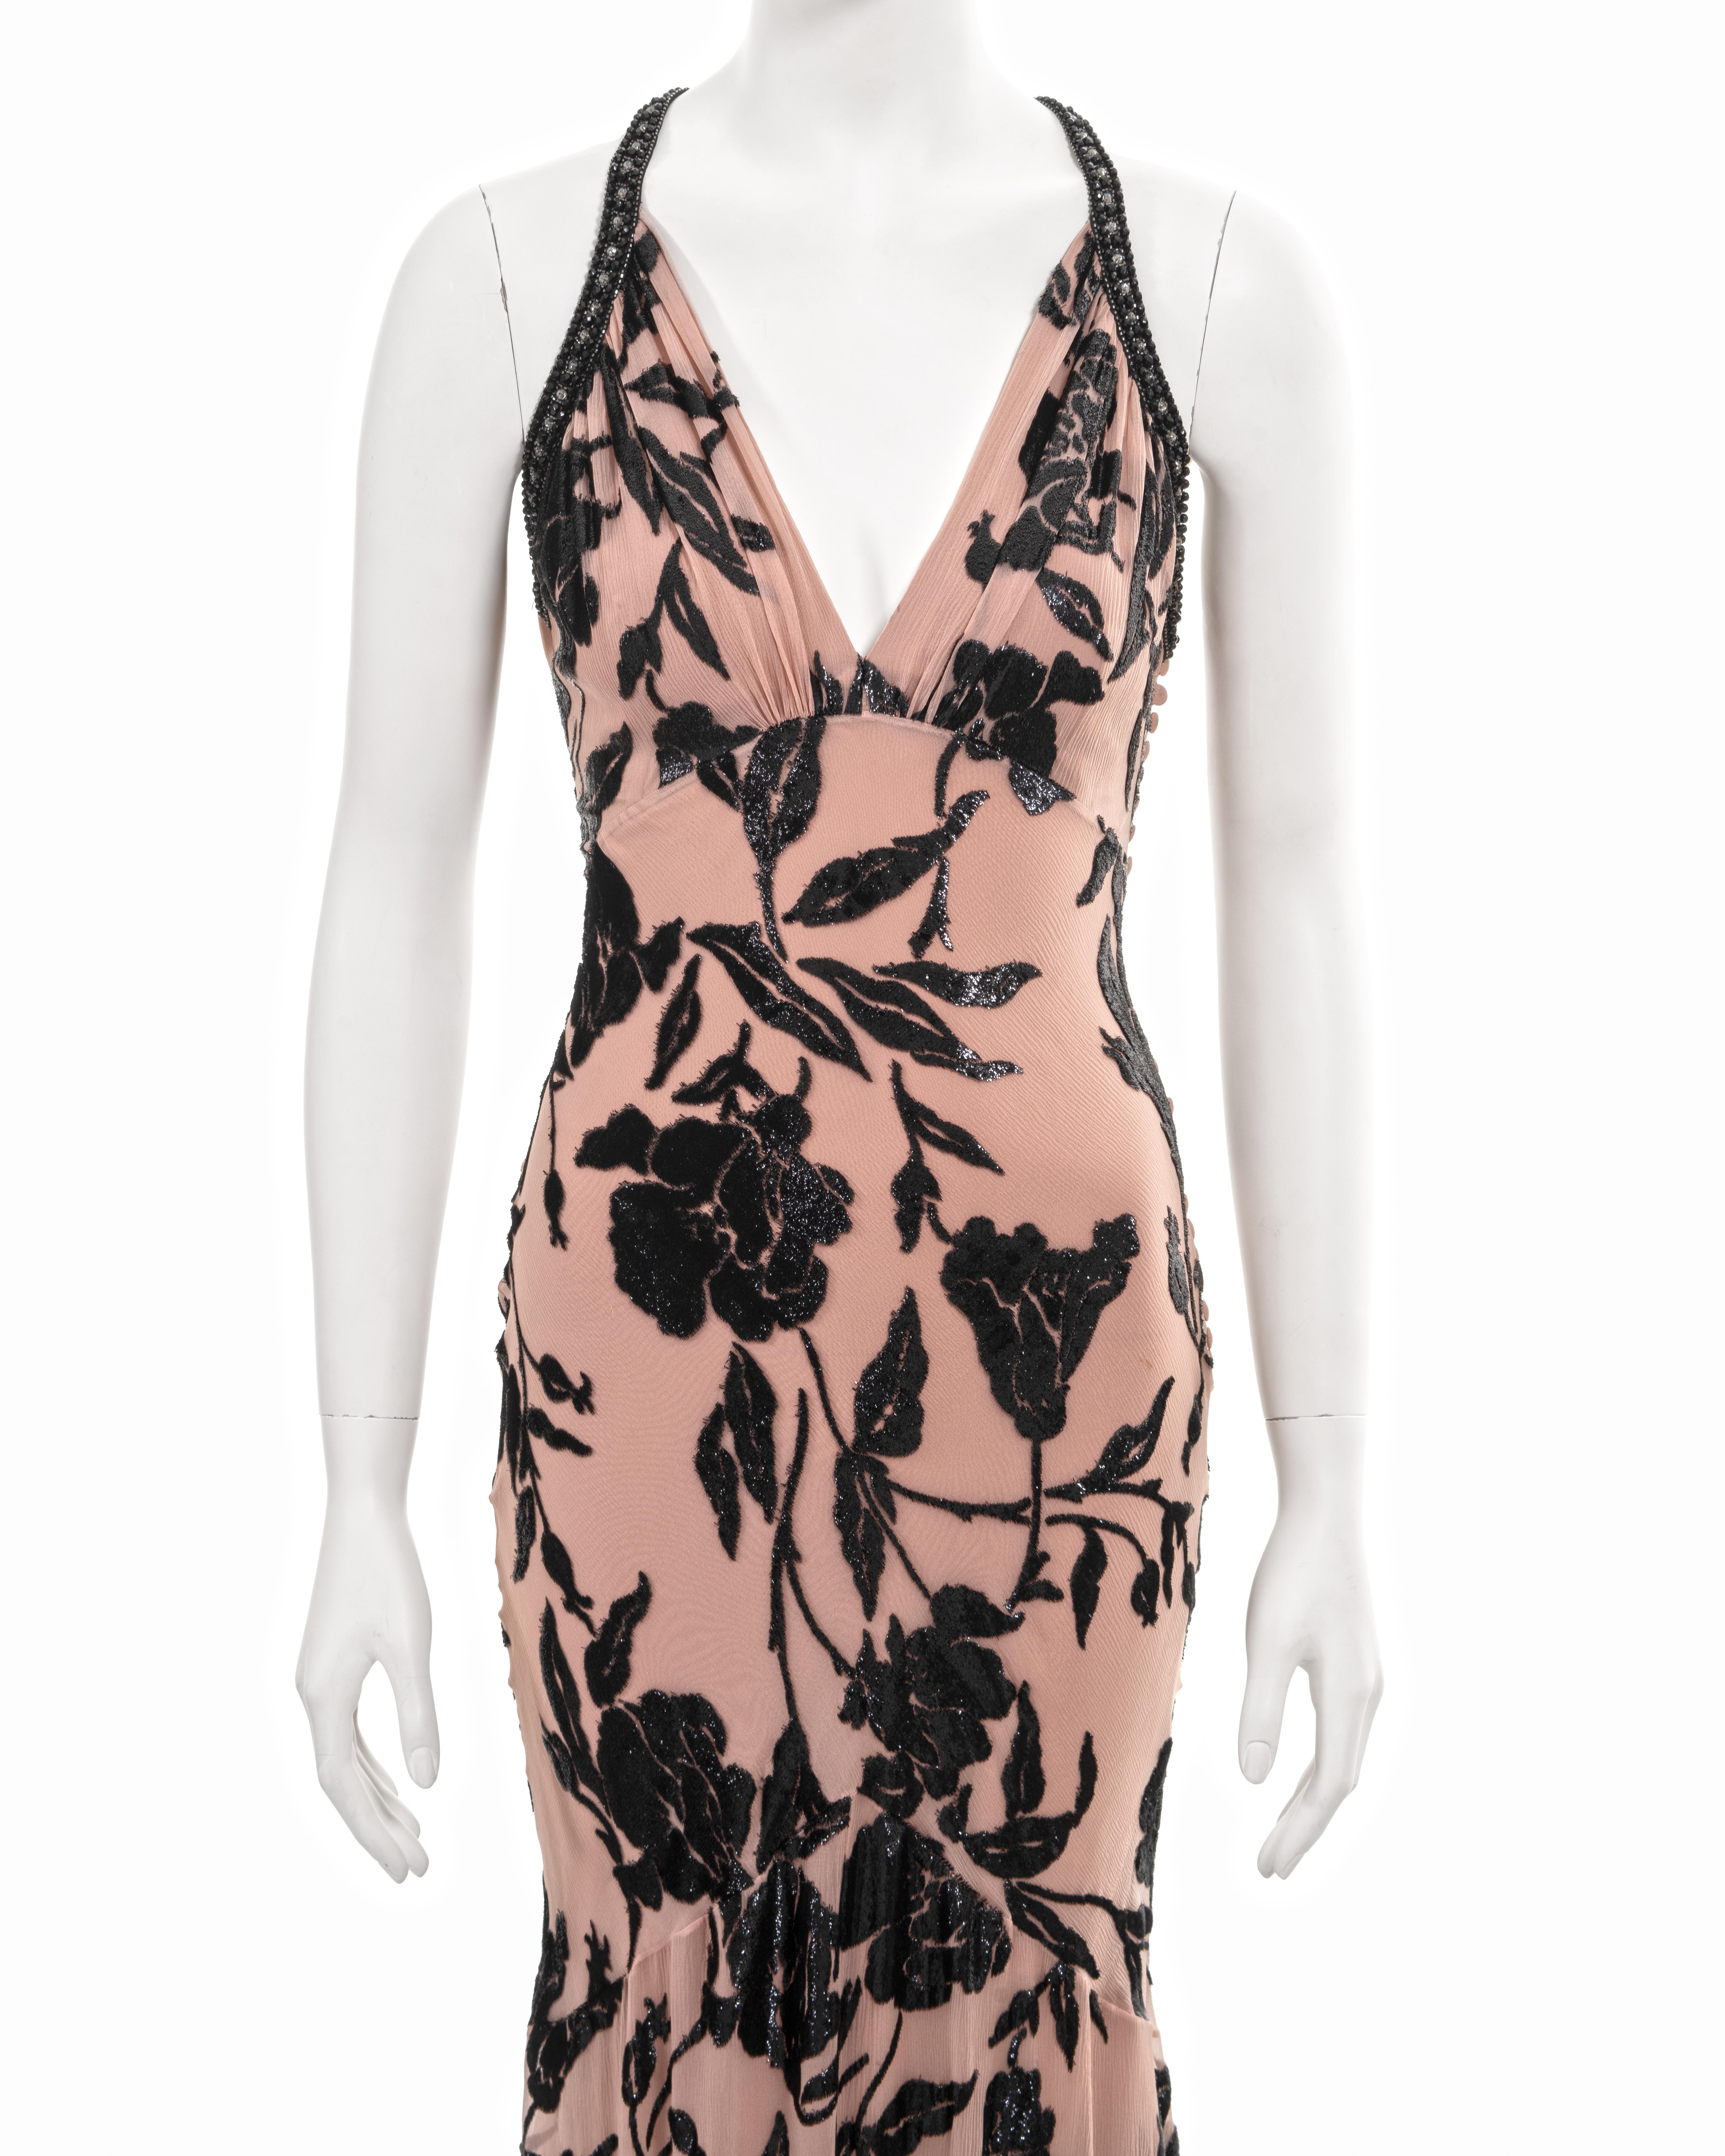 Christian Dior by John Galliano dusty pink floral silk evening dress fw 2010 In Excellent Condition For Sale In London, GB